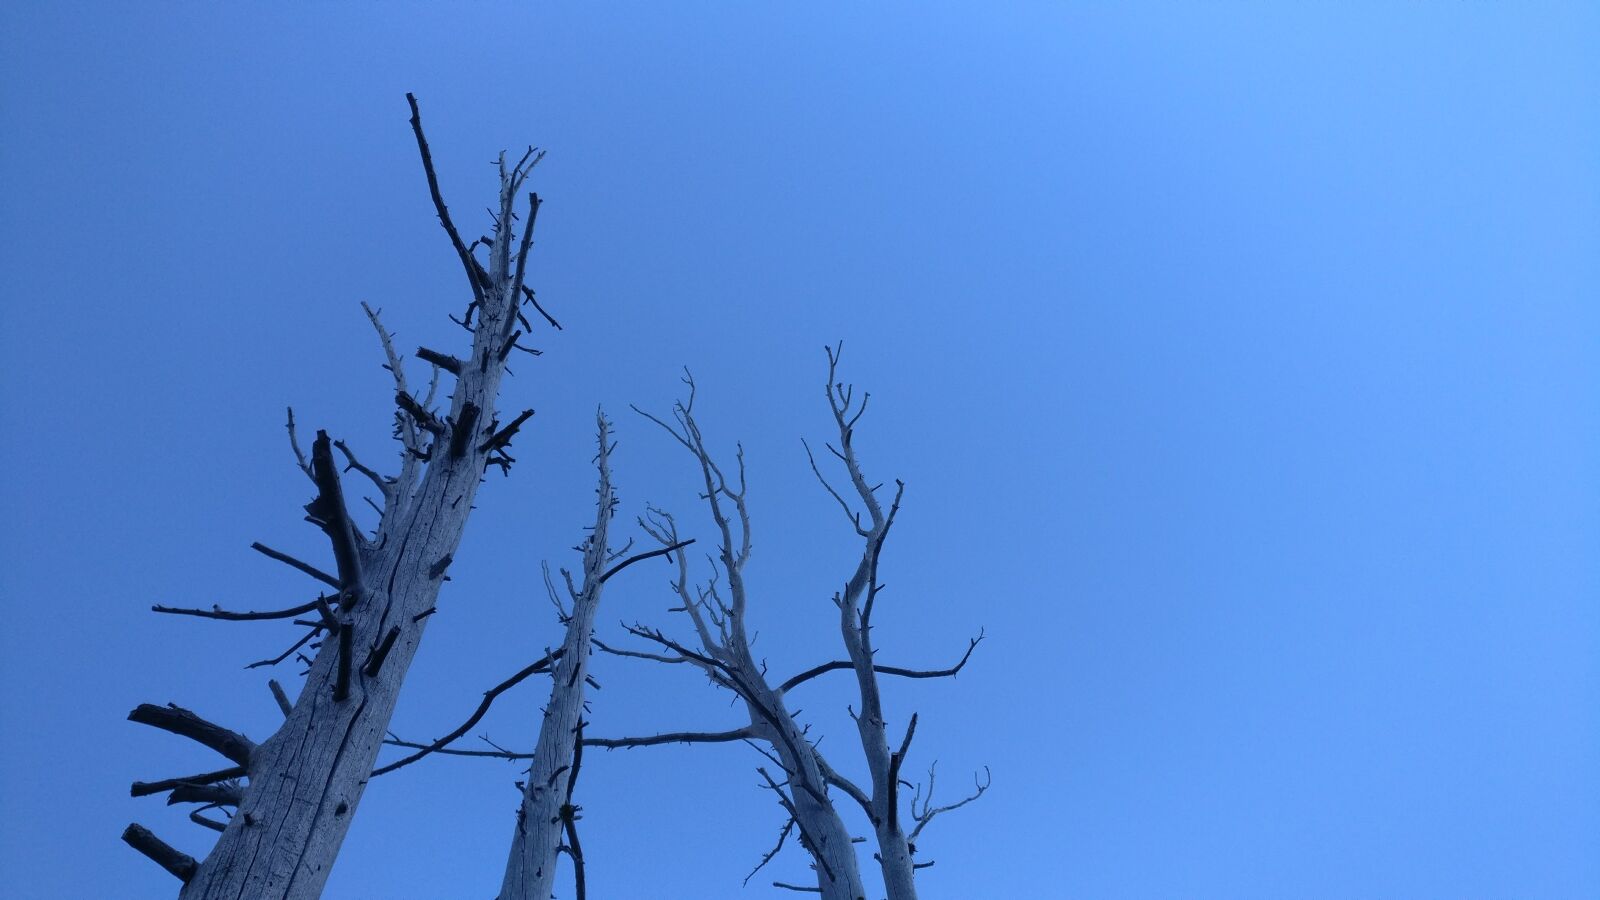 OnePlus A3000 sample photo. Blue, dead, trees, simple photography